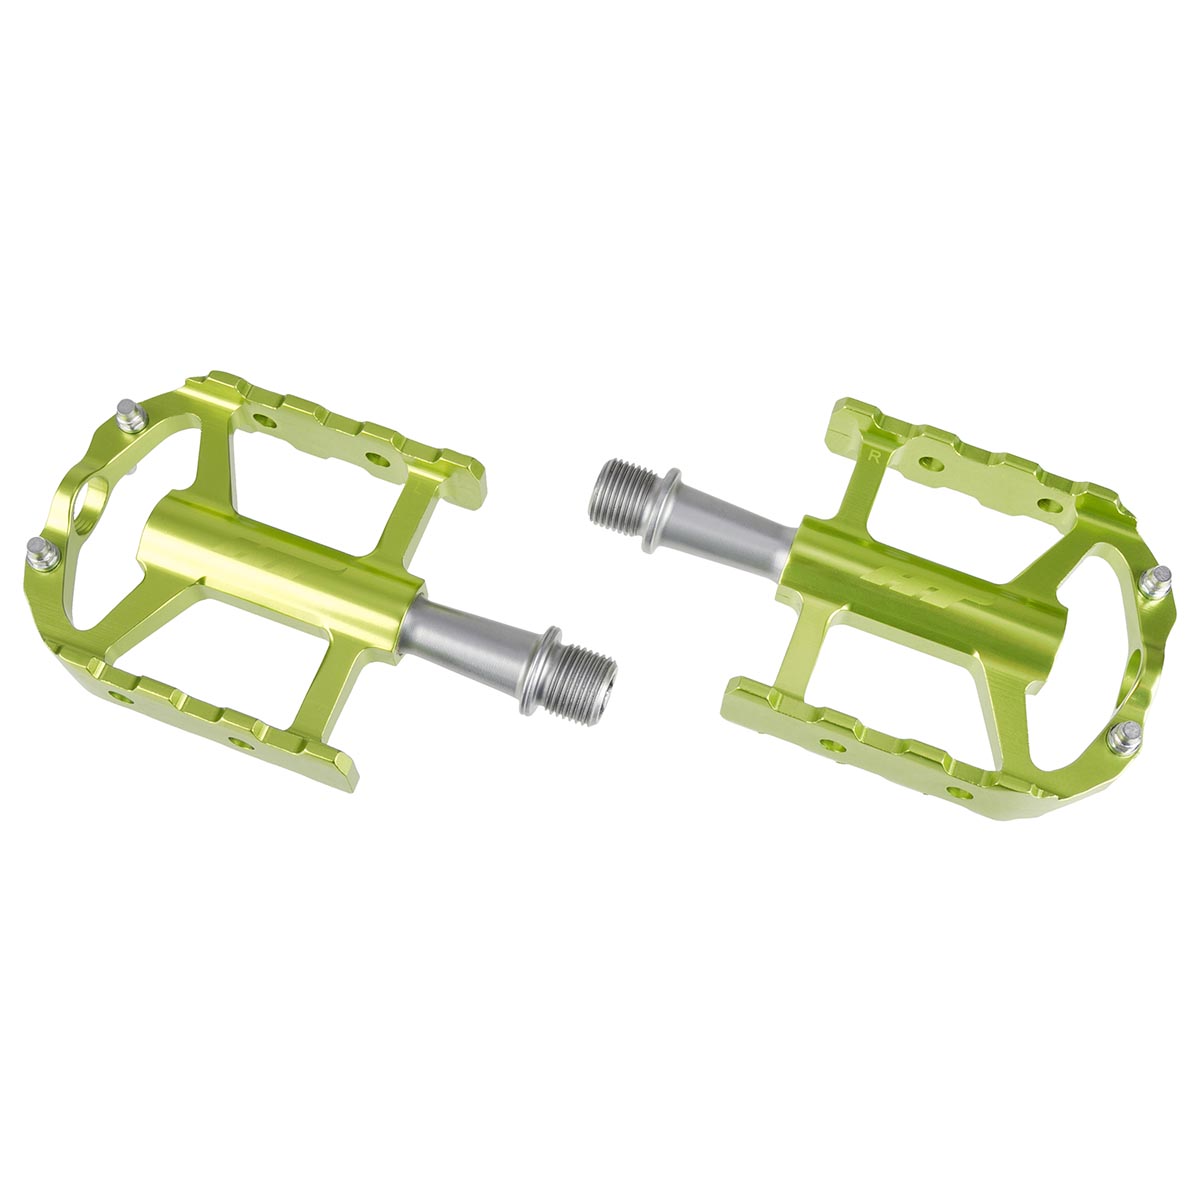 HT Components Pedals ARS03 Apple Green